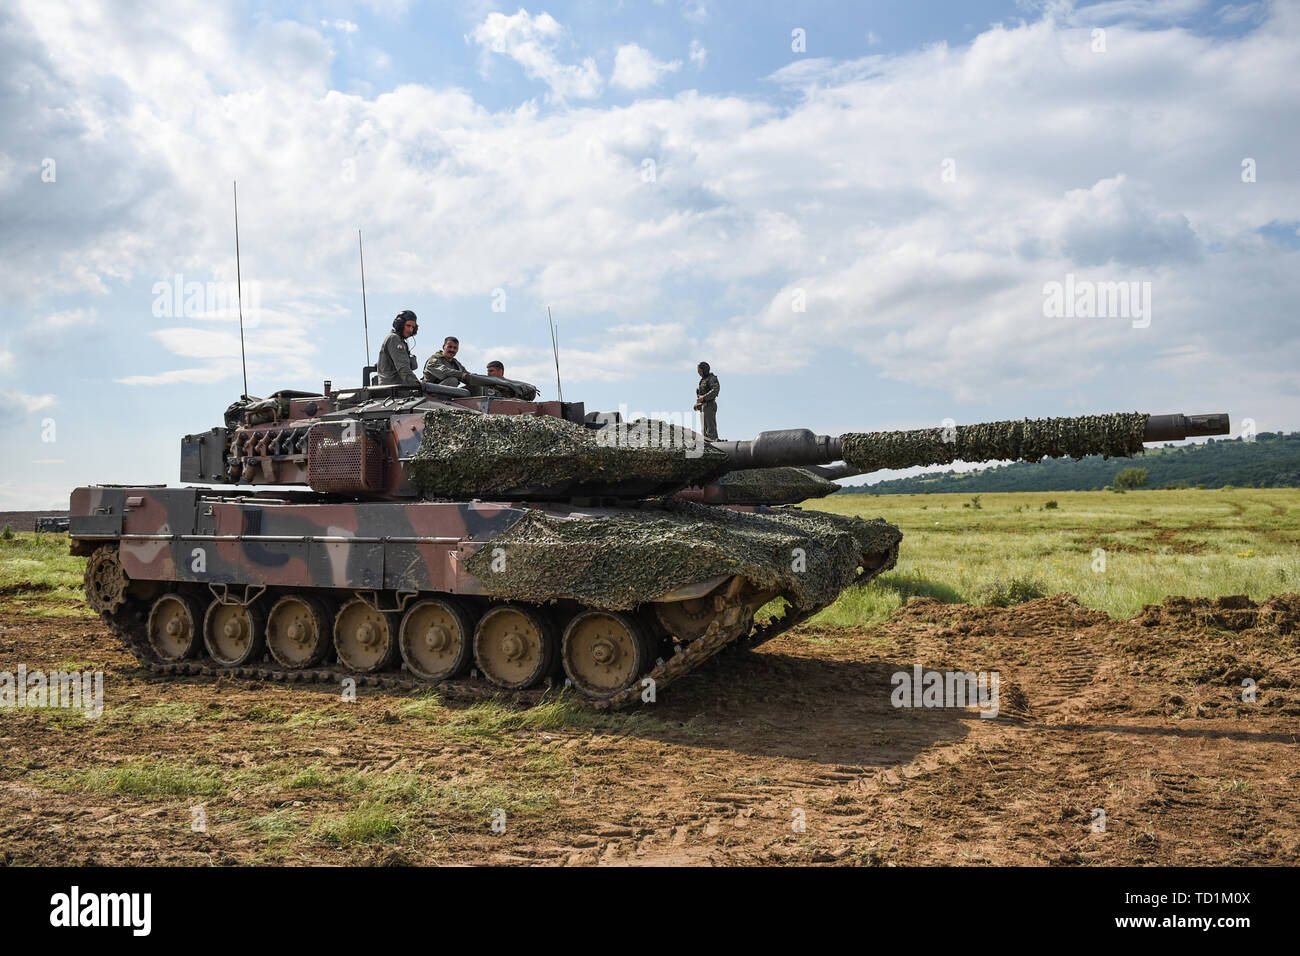 A platoon of German Leopard tanks controlled by the Greek Army prepare to fire upon distant targets June 10, 2019 on Novo Selo Training Area, Bulgaria, as a part of STRIKE BACK 19. This was the beginning of the second day of a two-part exercise in which a hilltop fighting position was lost and must be regained with the help of two platoons of U.S. Army Bradley Fighting Vehicles from 1 Battalion 16th Infantry Regiment and a Bulgarian armored unit.    STRIKE BACK 19 is a multinational exercise hosted by the Bulgarian Armed Forces at Novo Selo Training Area, Bulgaria, from June 6-20, 2019. STRIKE Stock Photo